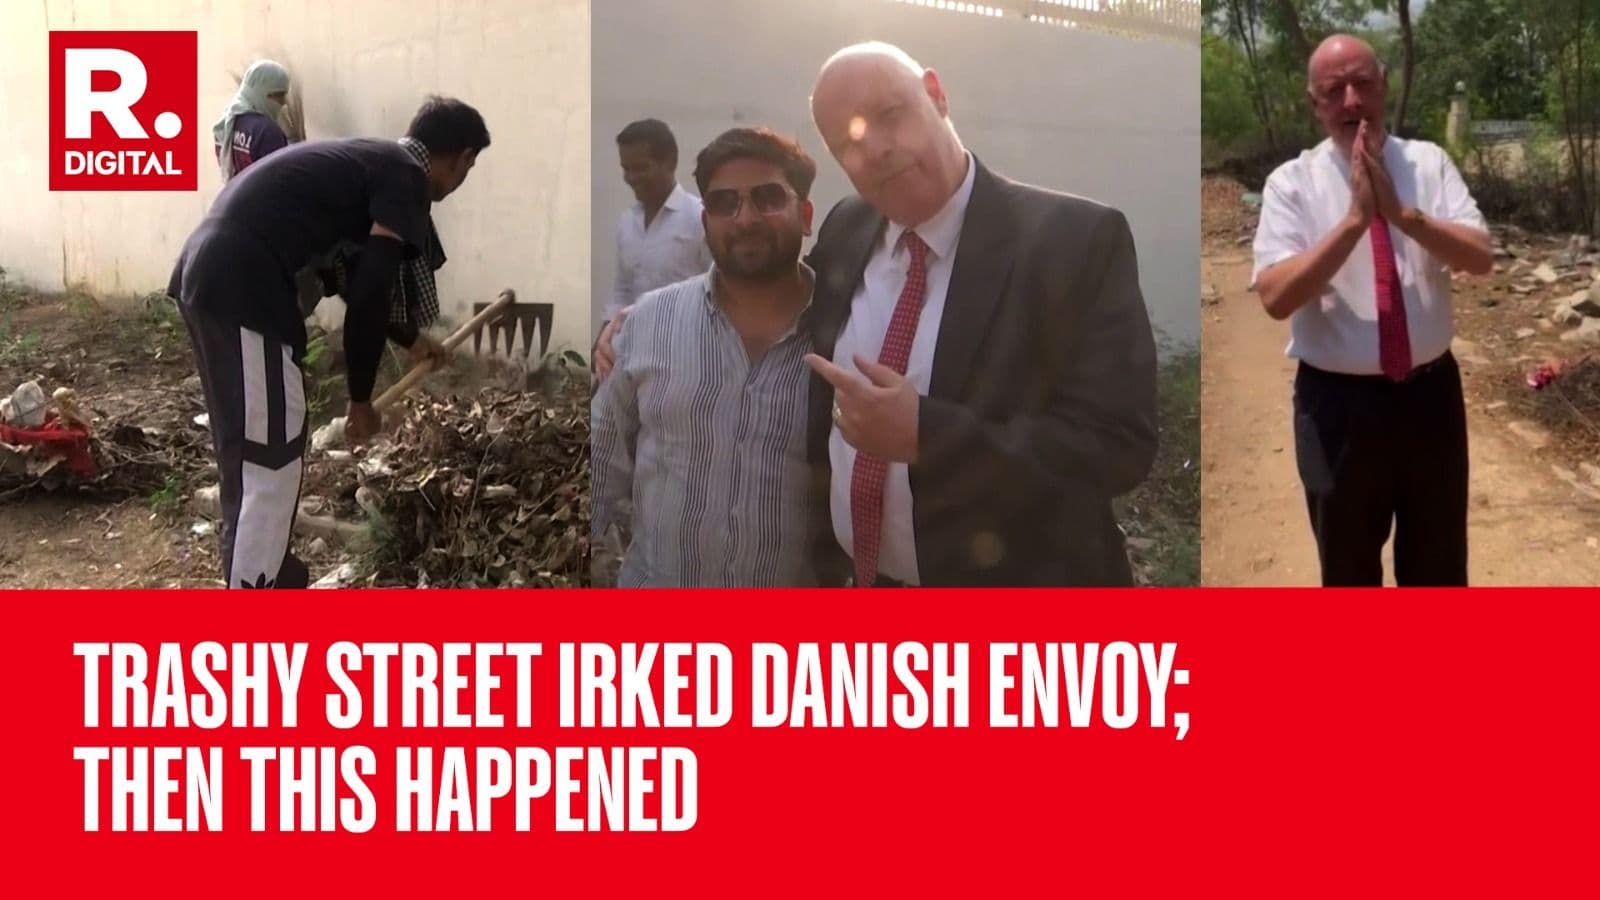 This Is What Happened After Danish Envoy Flagged Trashy, Dirty Lane Near Embassy In Viral Video